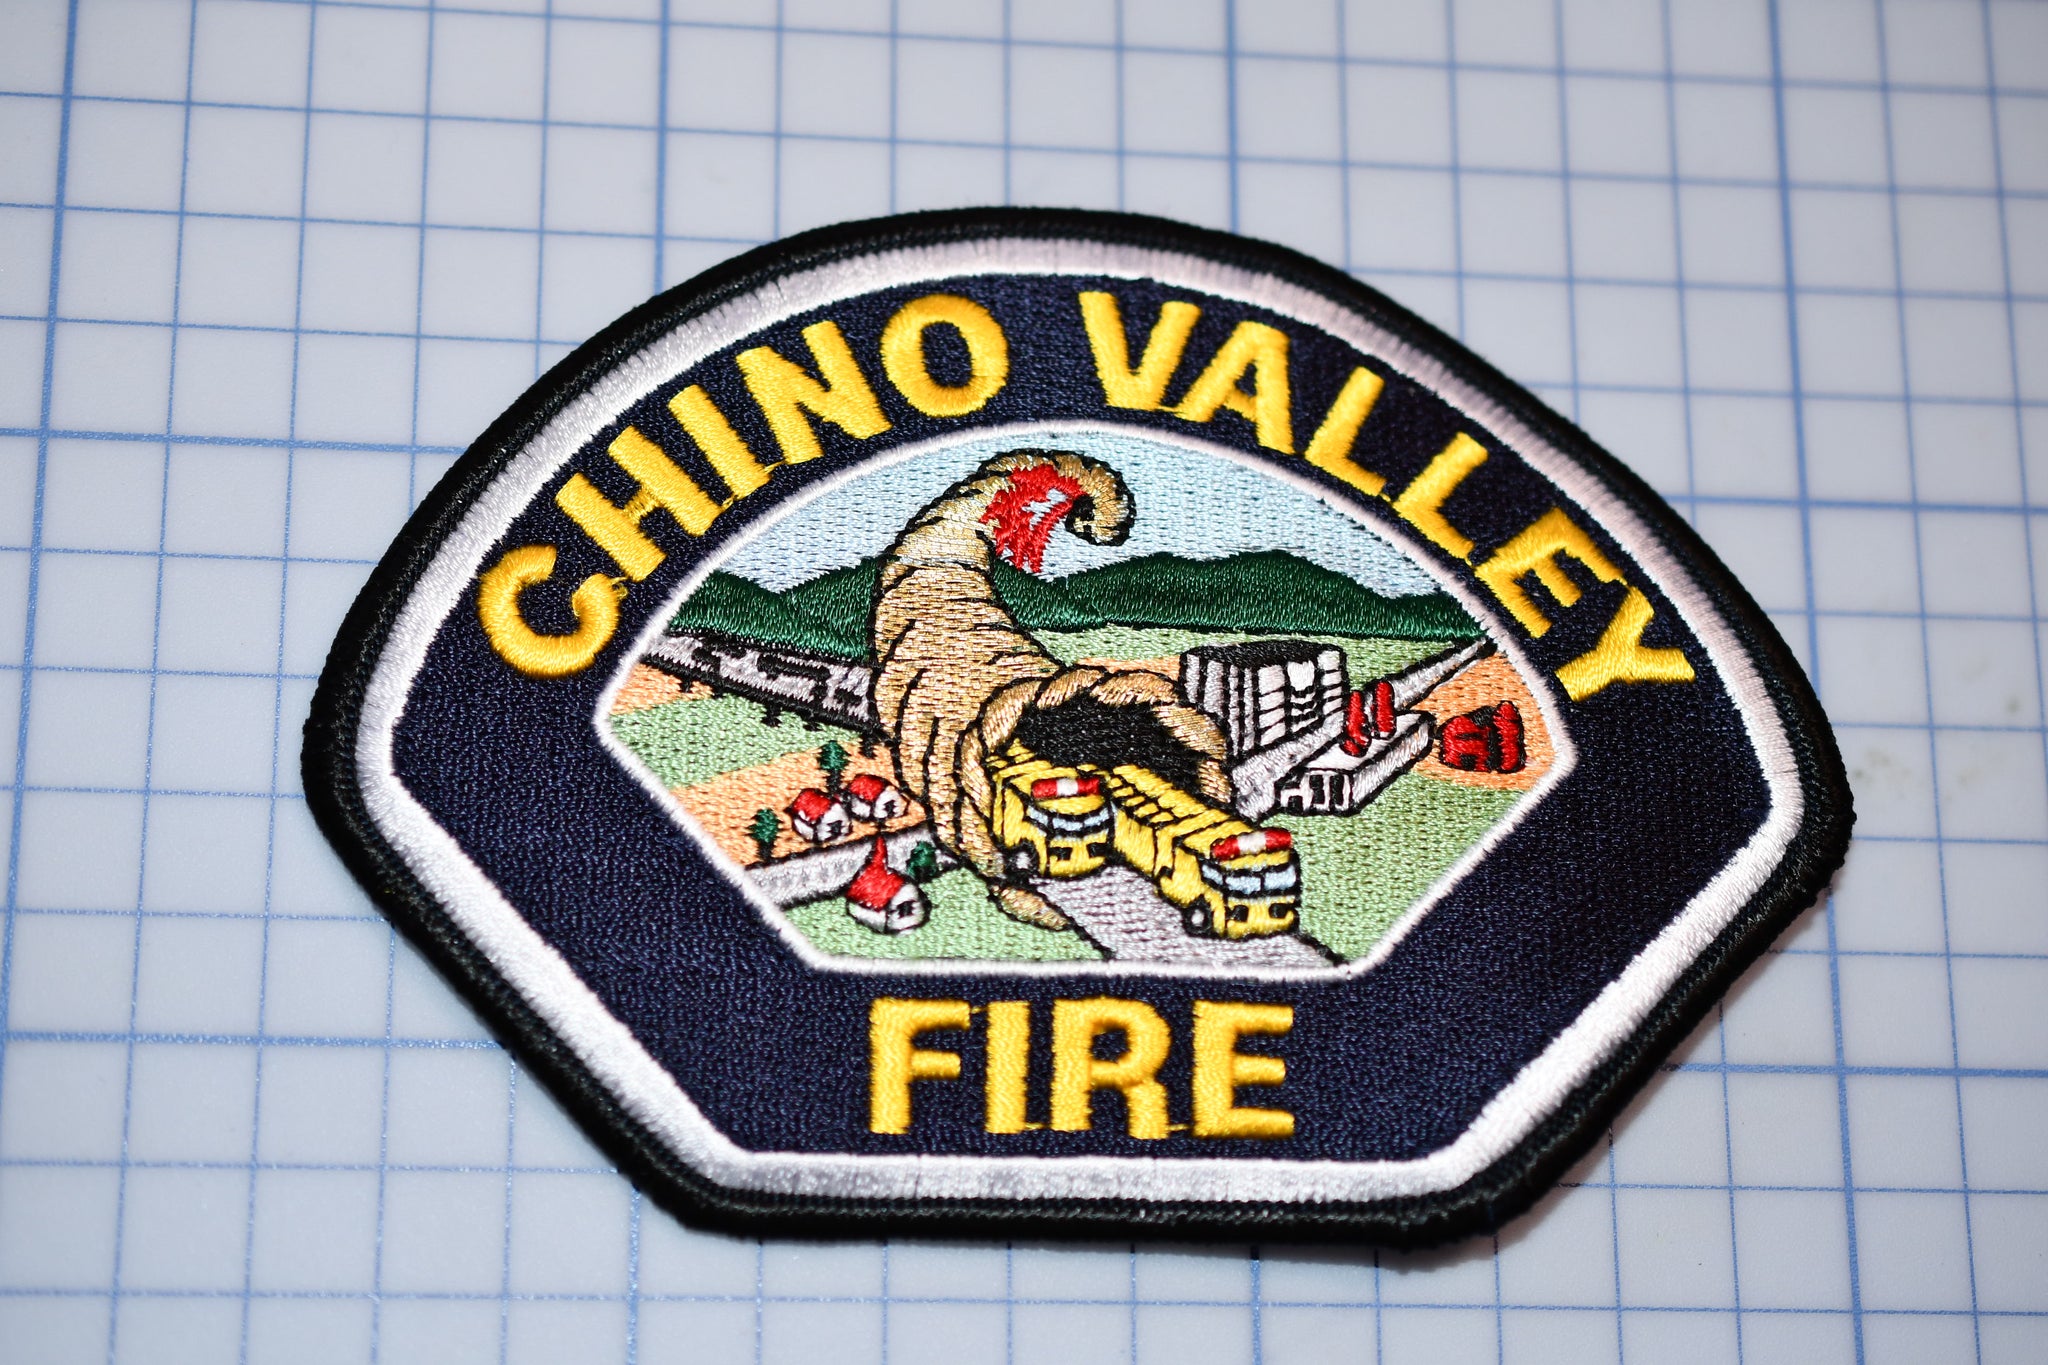 Chino Valley California Fire Patch (B29-361)